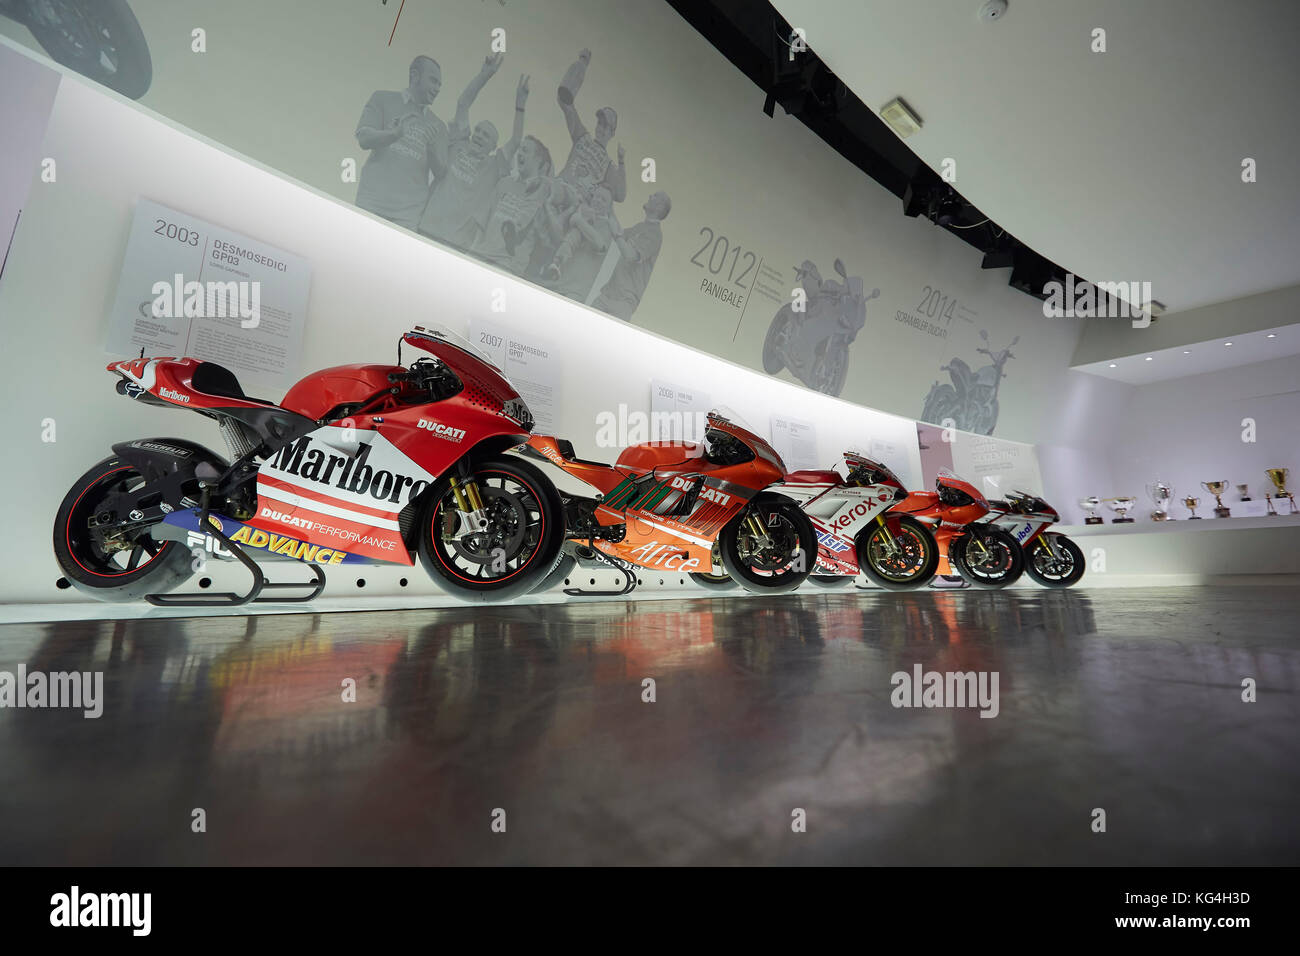 Motorcycles on display at the Ducati factory museum, Bologna, Italy. Stock Photo